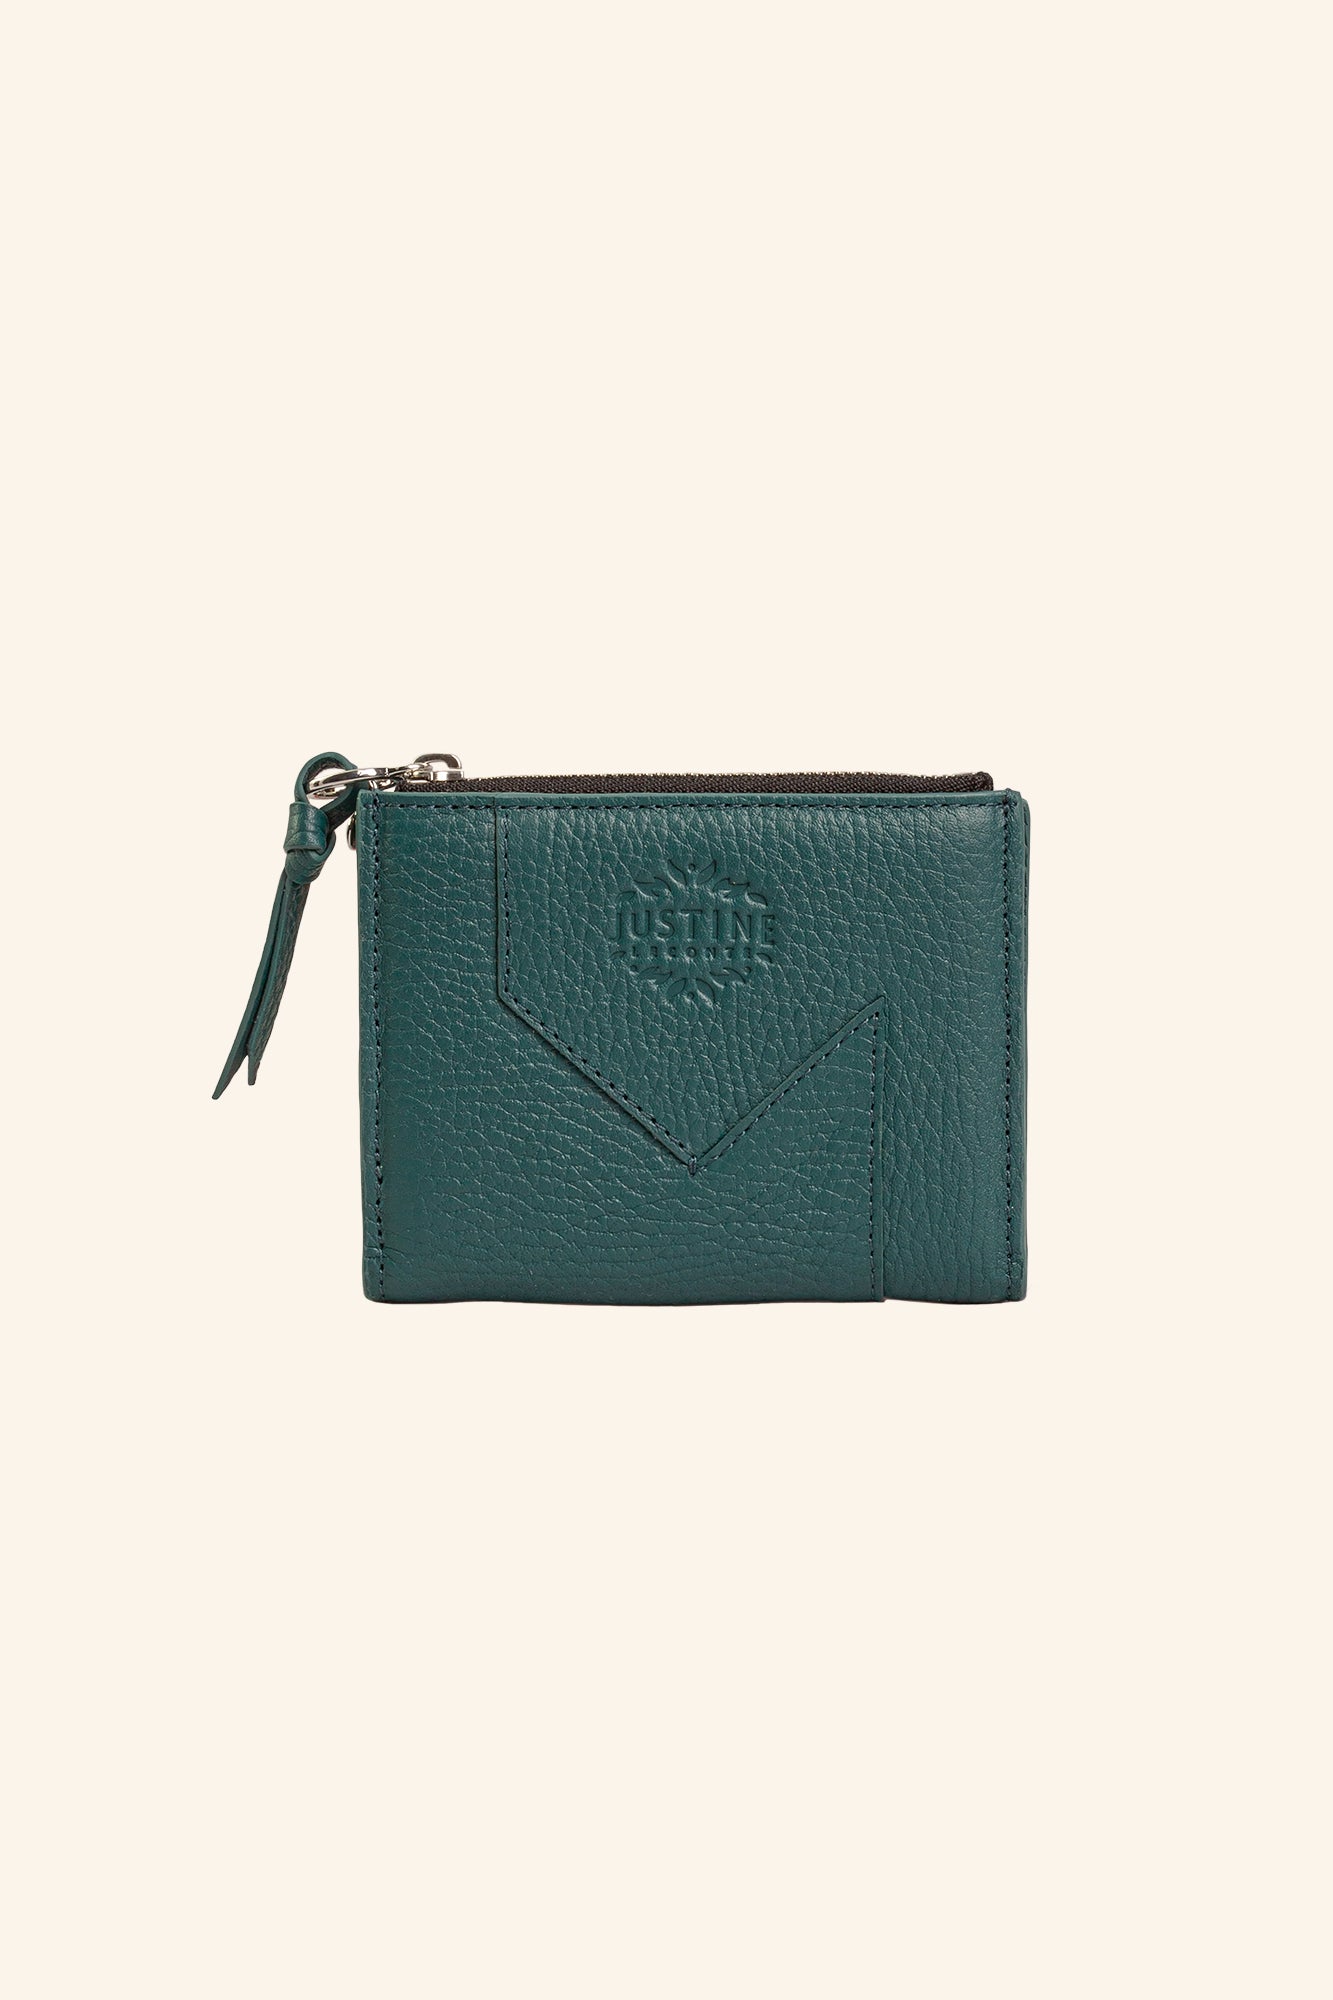 JL wallet leather - Teal green